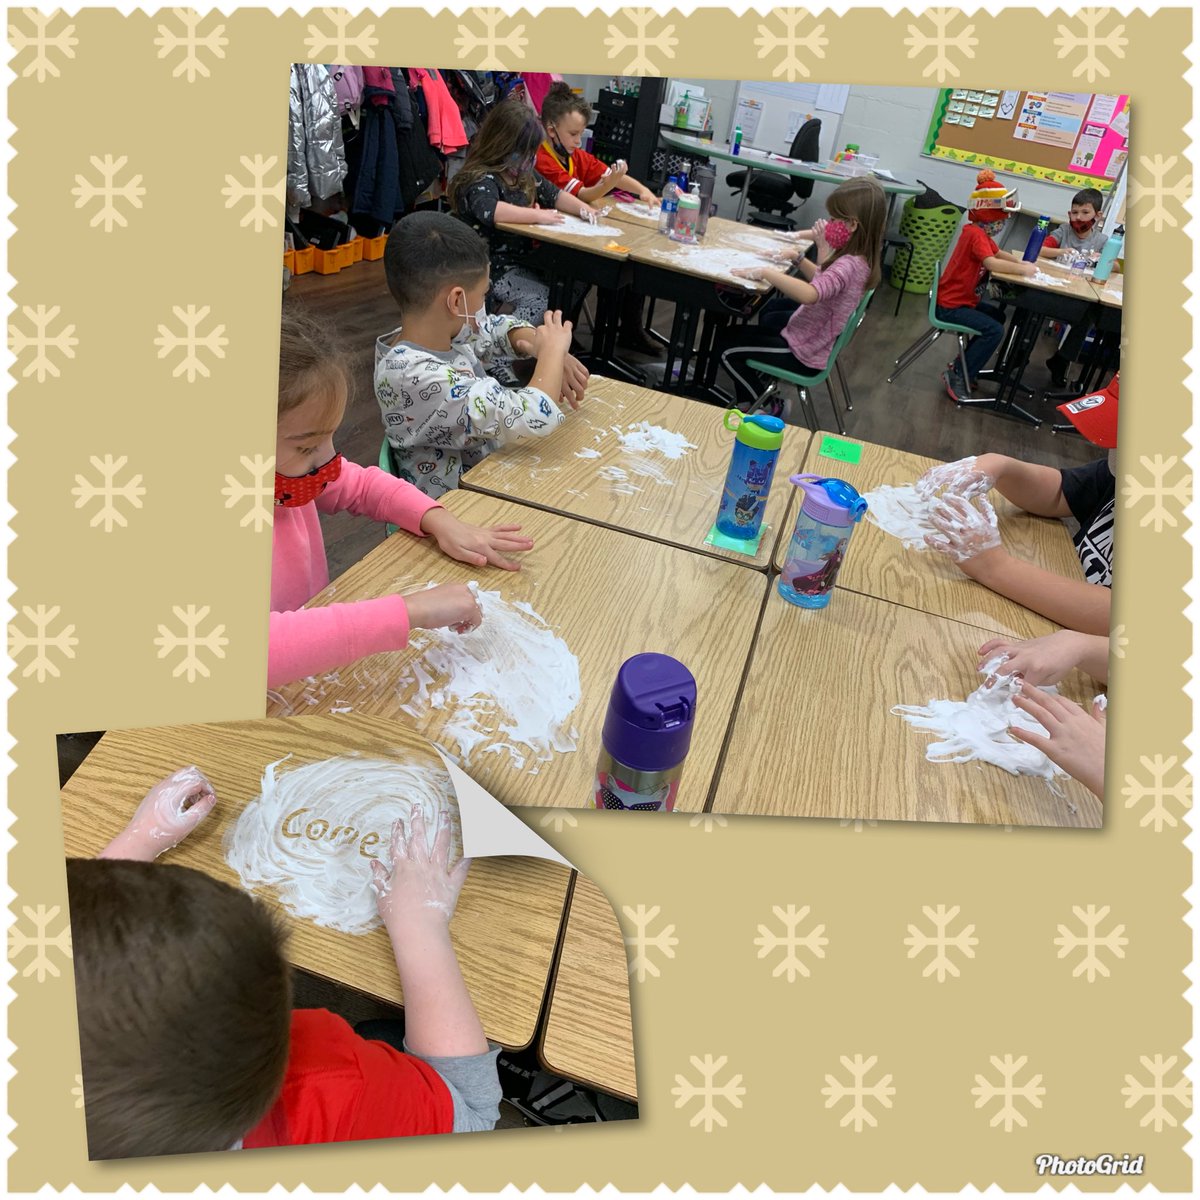 Word work with shaving cream in first grade? Um, yes! Call it “old school” if you will, but we call it F~U~N! (Our desks are clean and our room smells good, too.) #NeverTooBigForFun #NeverTooOldForFun #FunWhileLearning #MsKirksFirsties #FirstGradeRocks